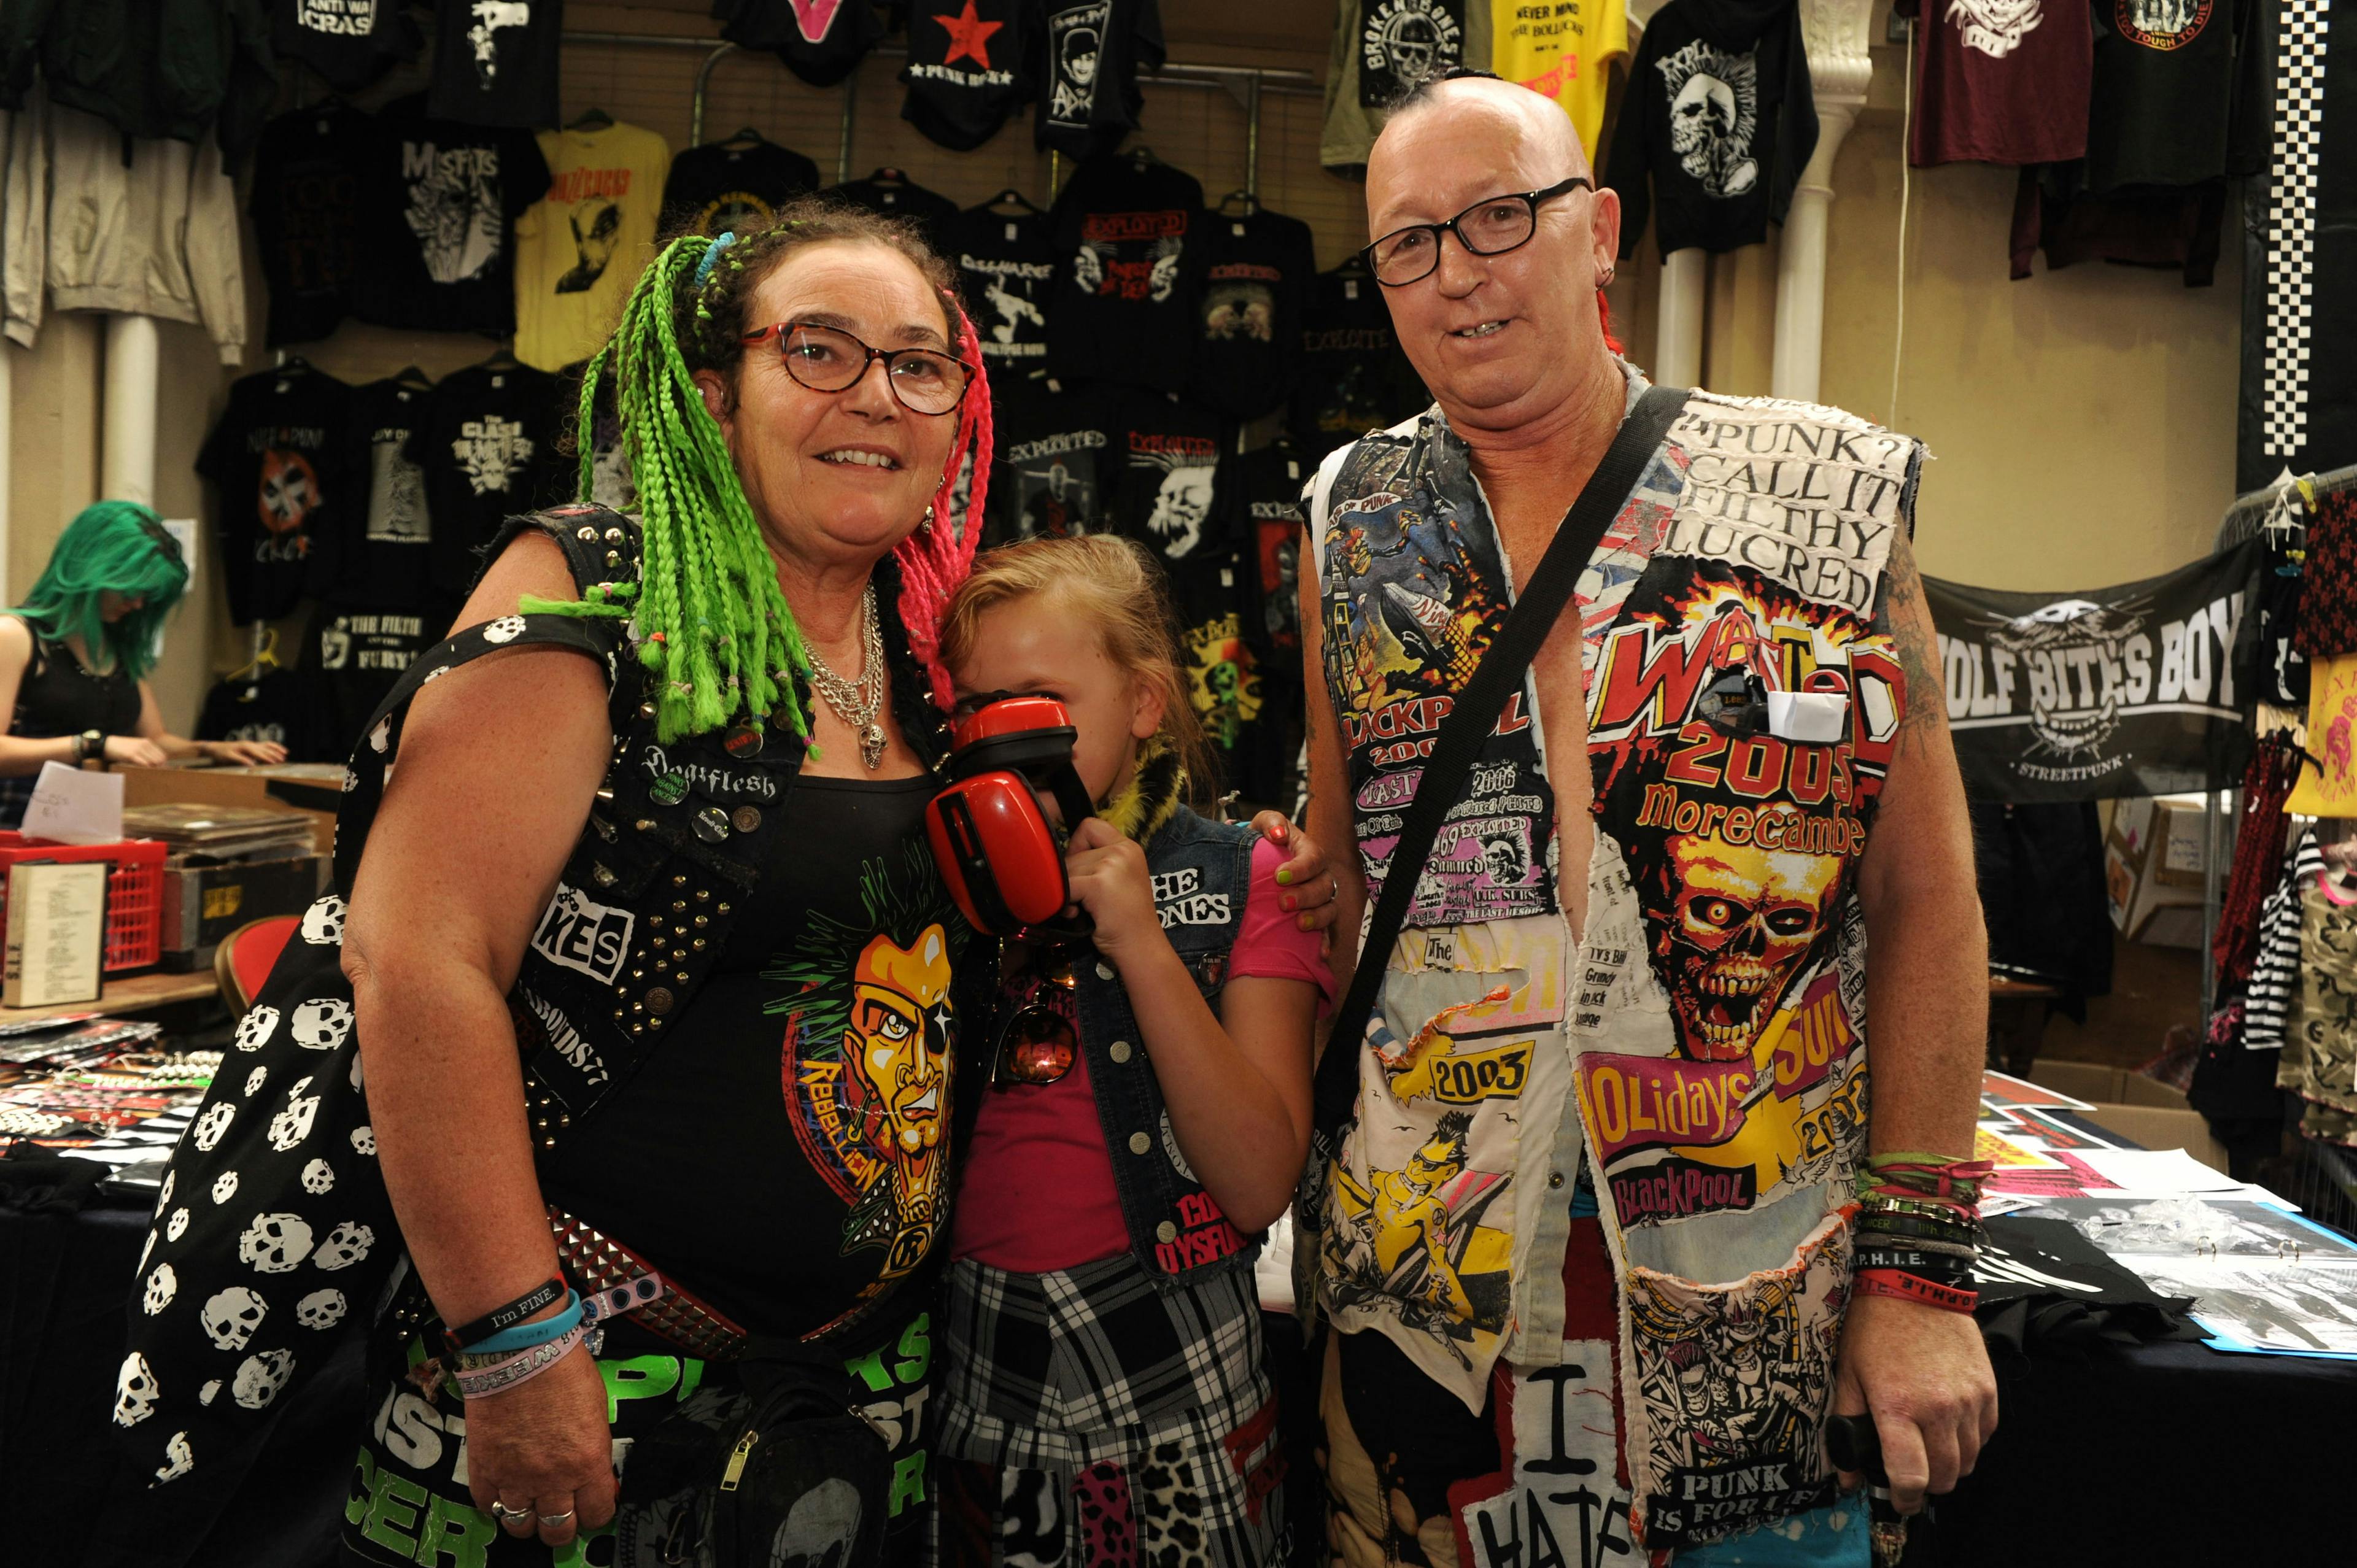 The 13 People You’re Sure To Bump Into At A Punk Rock Festival